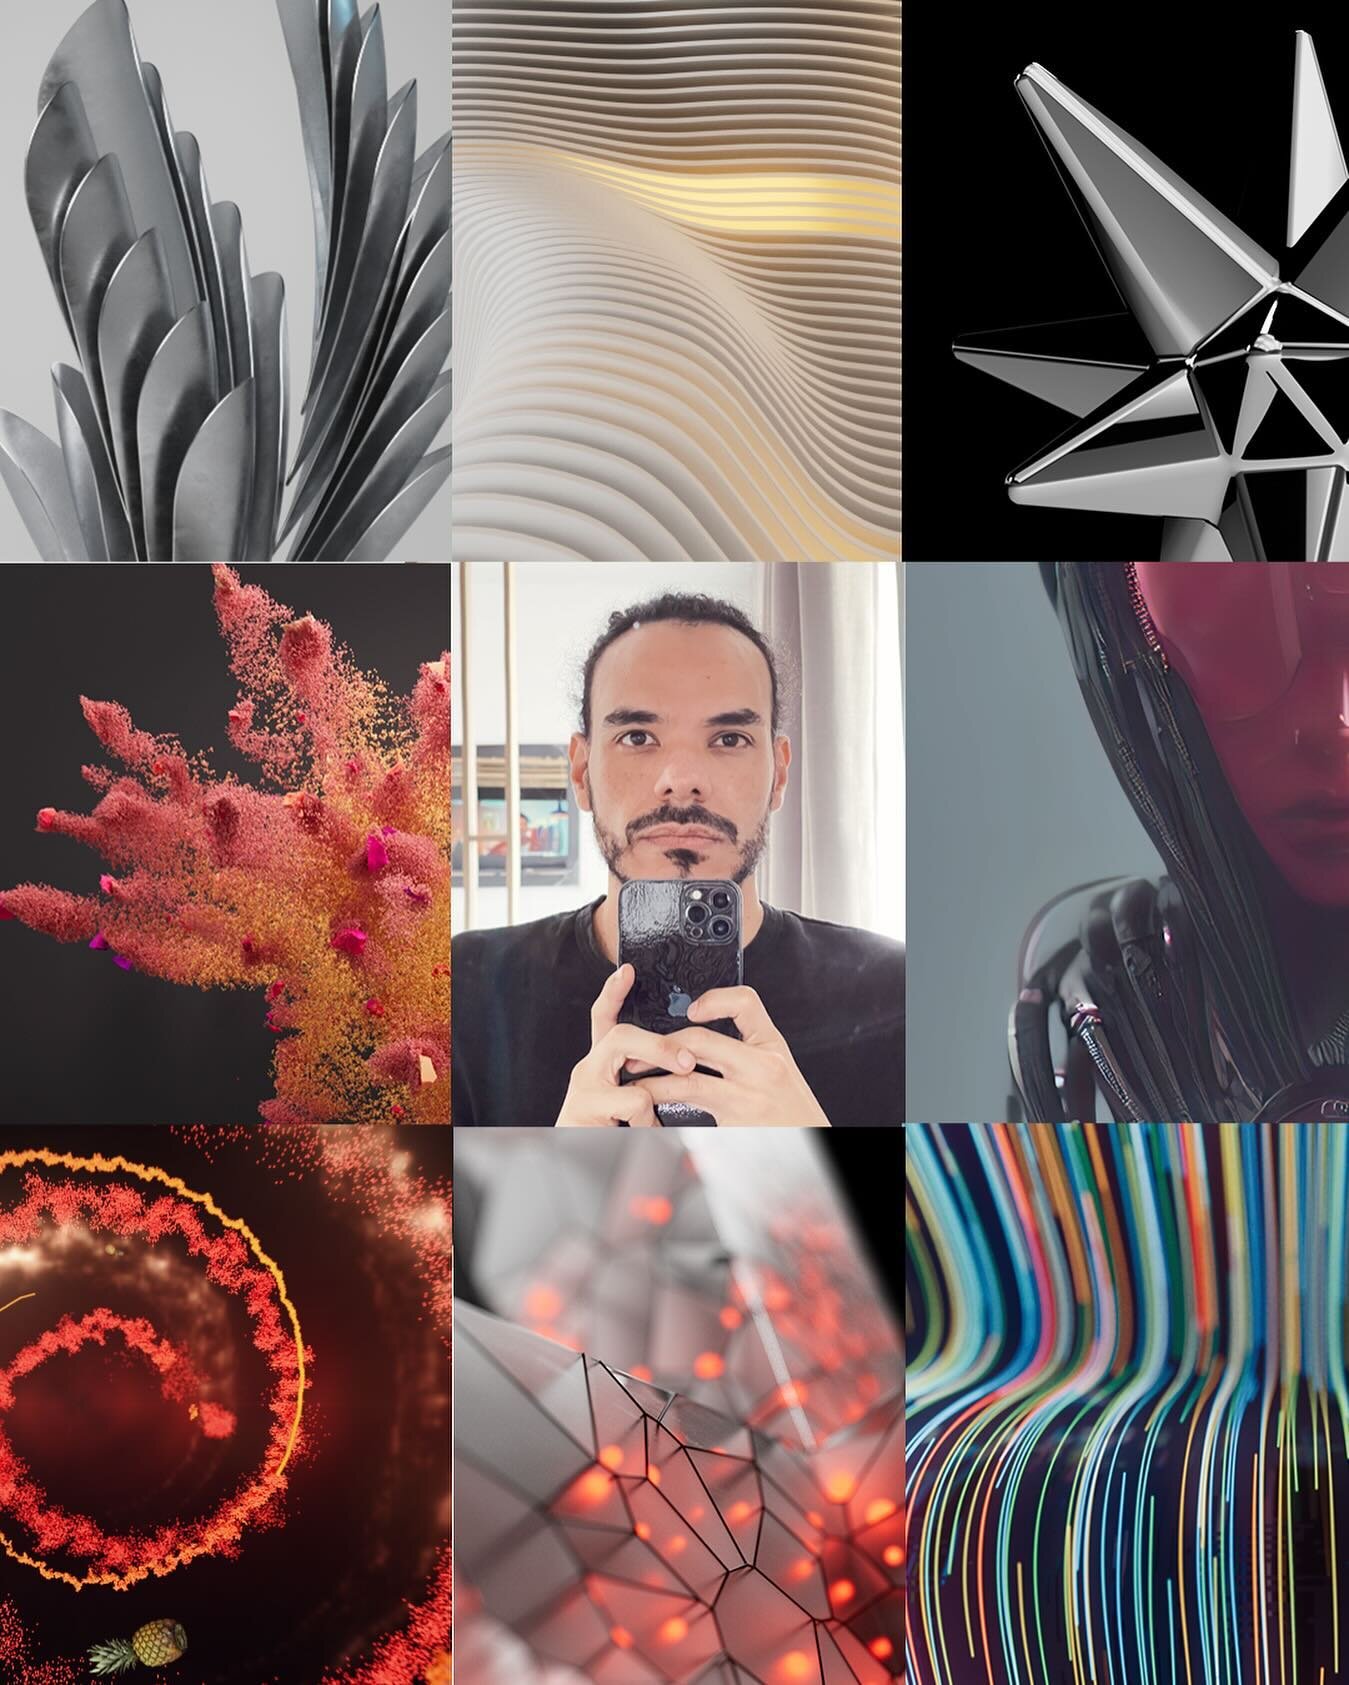 In 2023, I had the chance to undertake client projects, delve into Houdini, and explore AI. Grateful for the support from My family studios other amazing artist and friends. Here&rsquo;s to welcoming 2024!
.
.
#motiongraphics #motiongdesign #design #